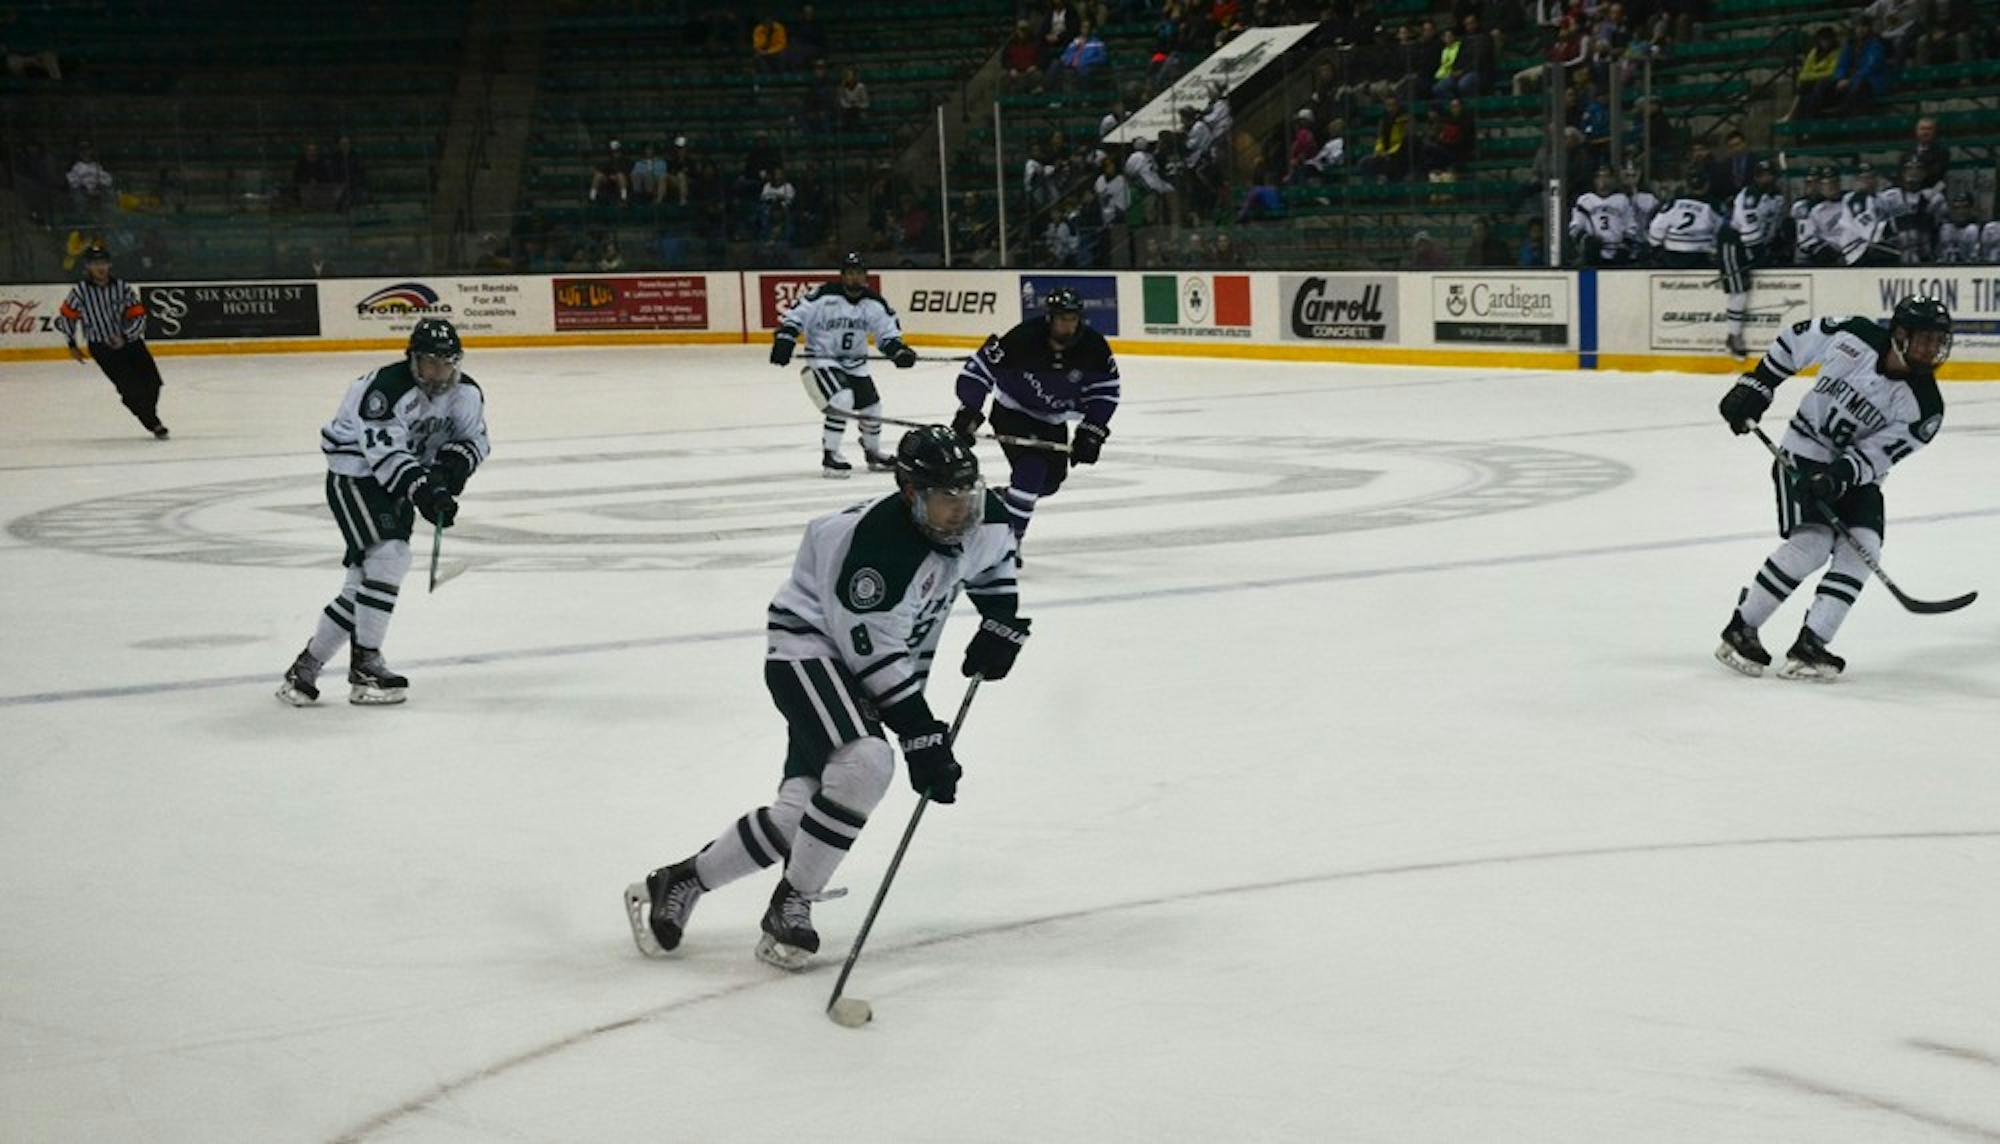 Dartmouth faces Quinnipiac and Princeton Universities this weekend.